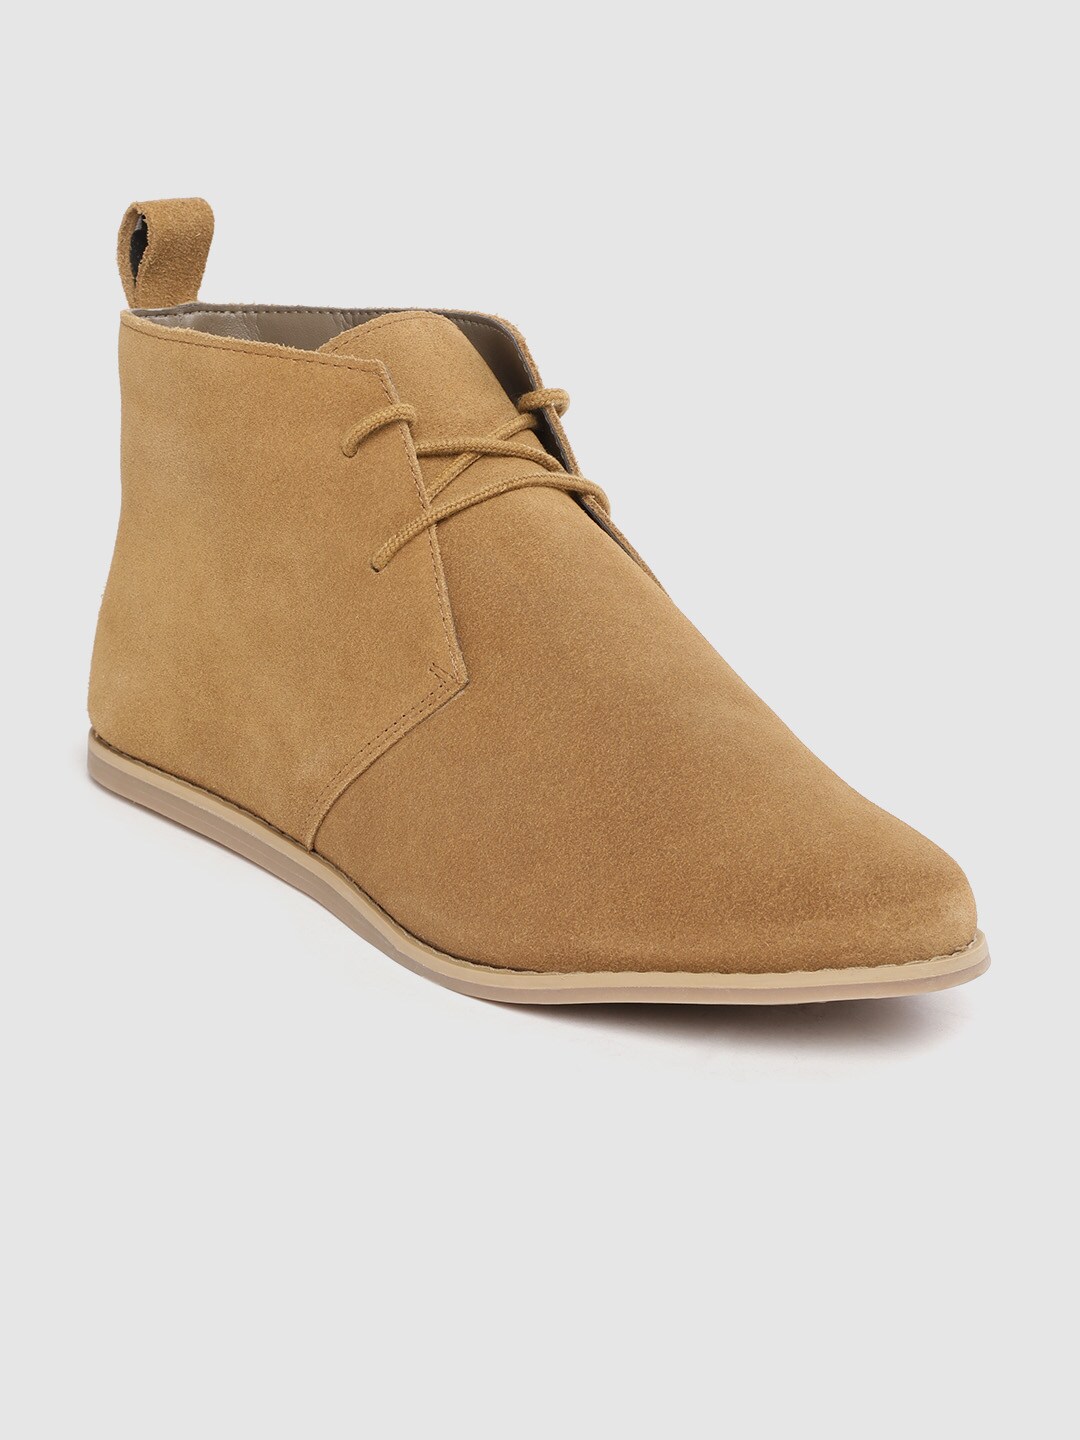 Carlton London Women Camel Brown Solid Mid-Top Flat Chukka Boots Price in India